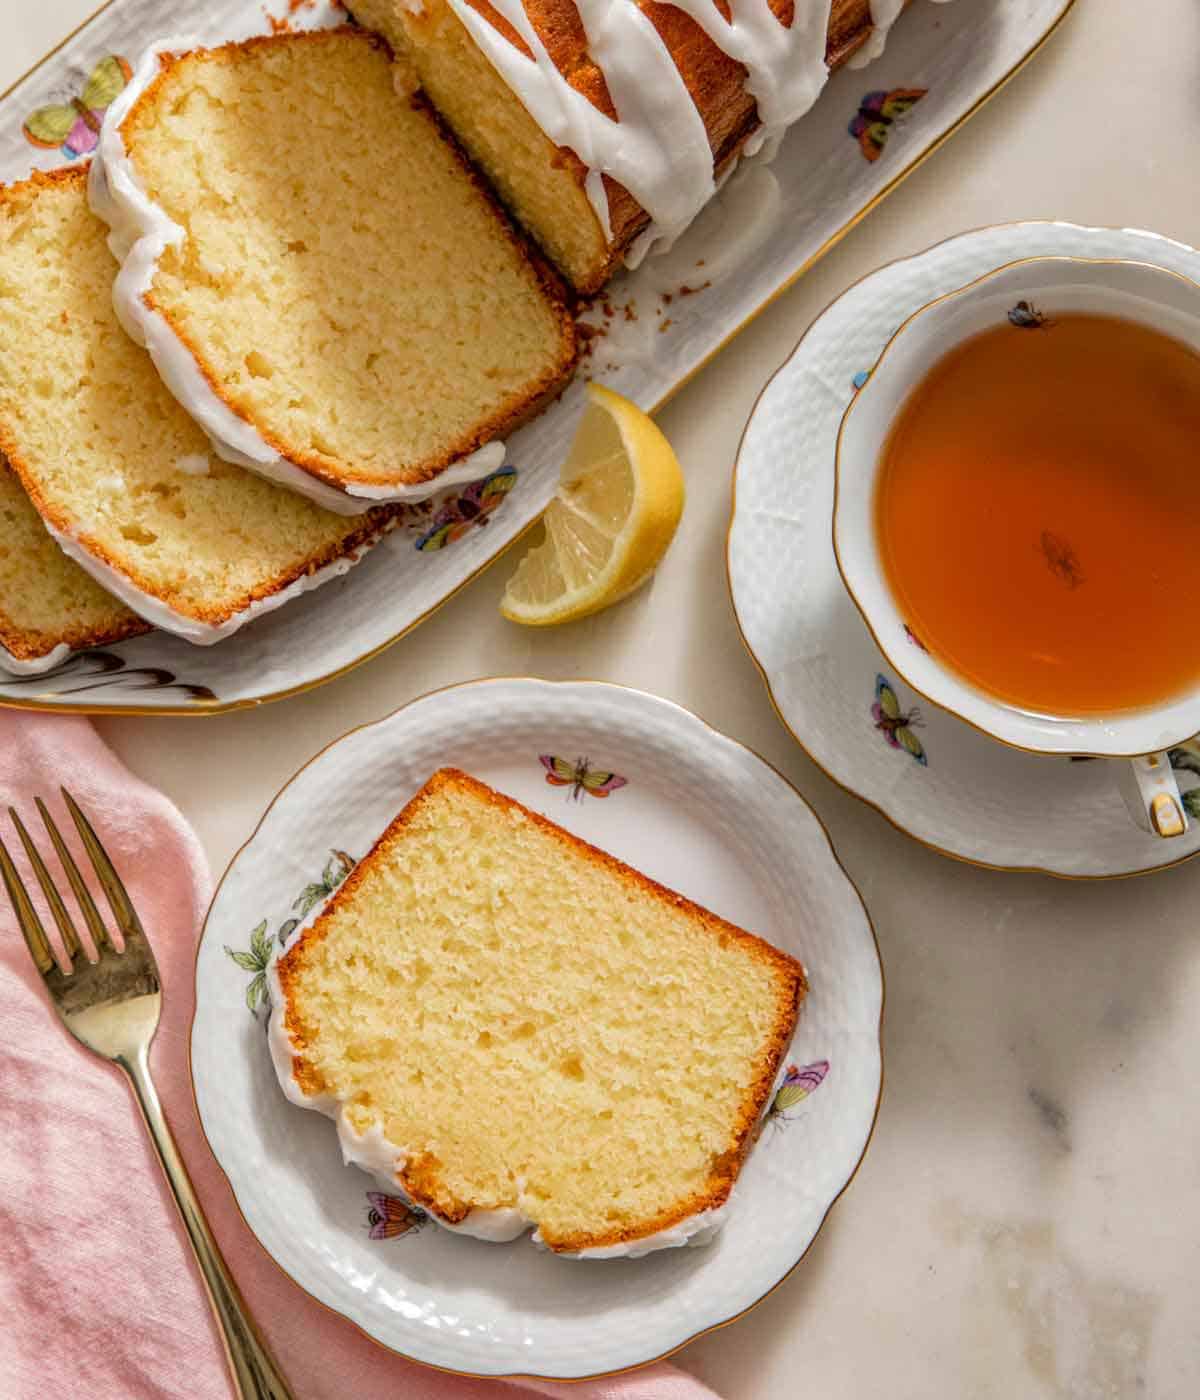 Overhead view of a plate with a slice of lemon pound cake by a cup of tea and the cut loaf.